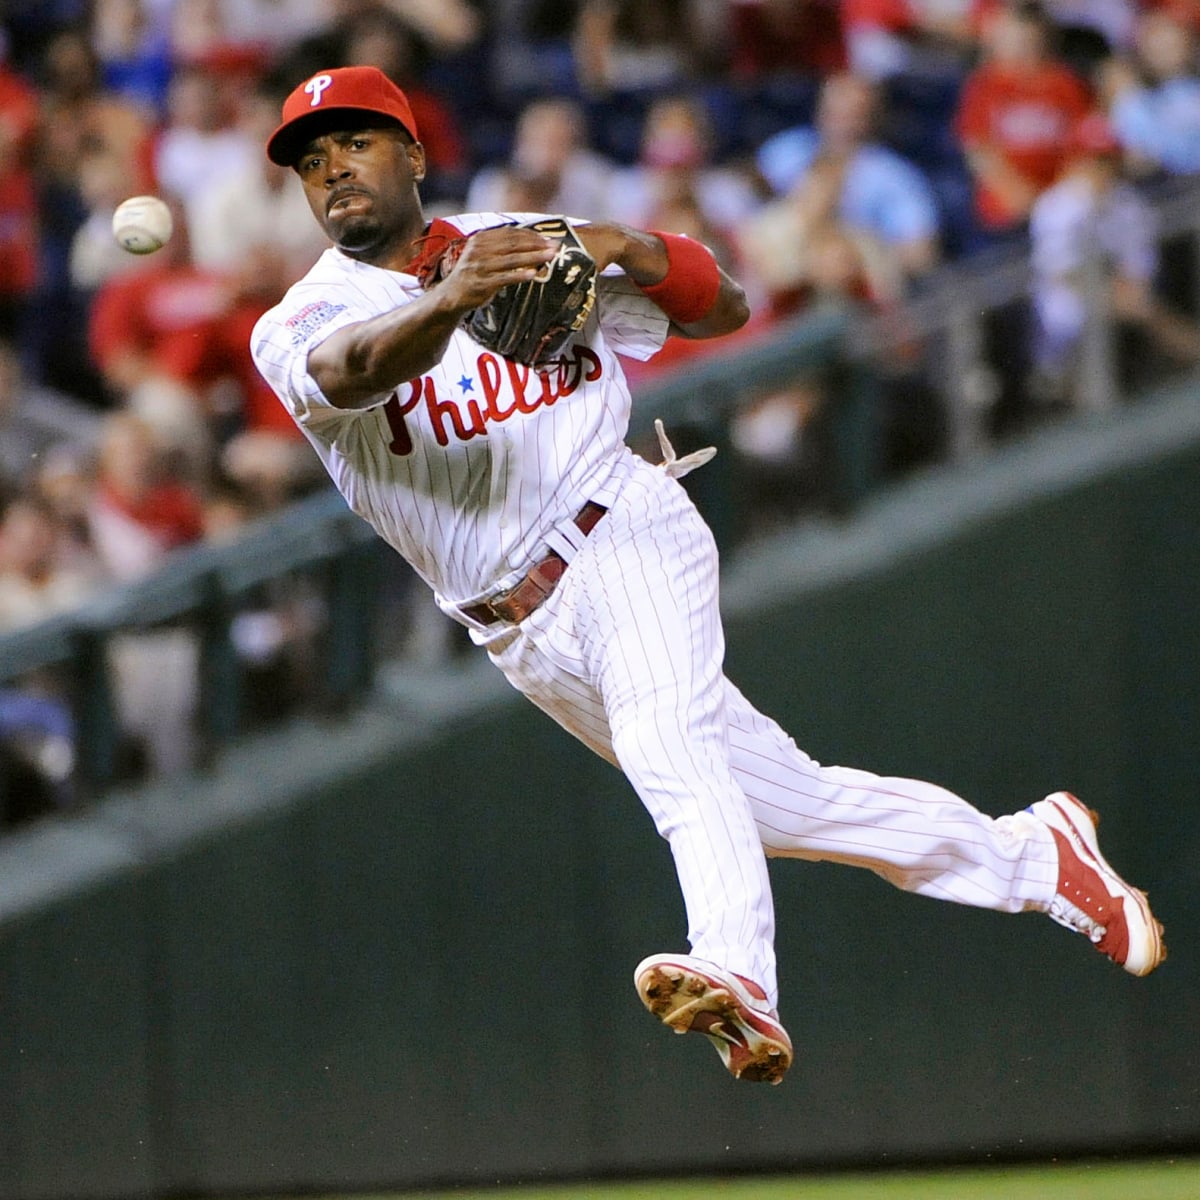 Jimmy Rollins reaches a milestone